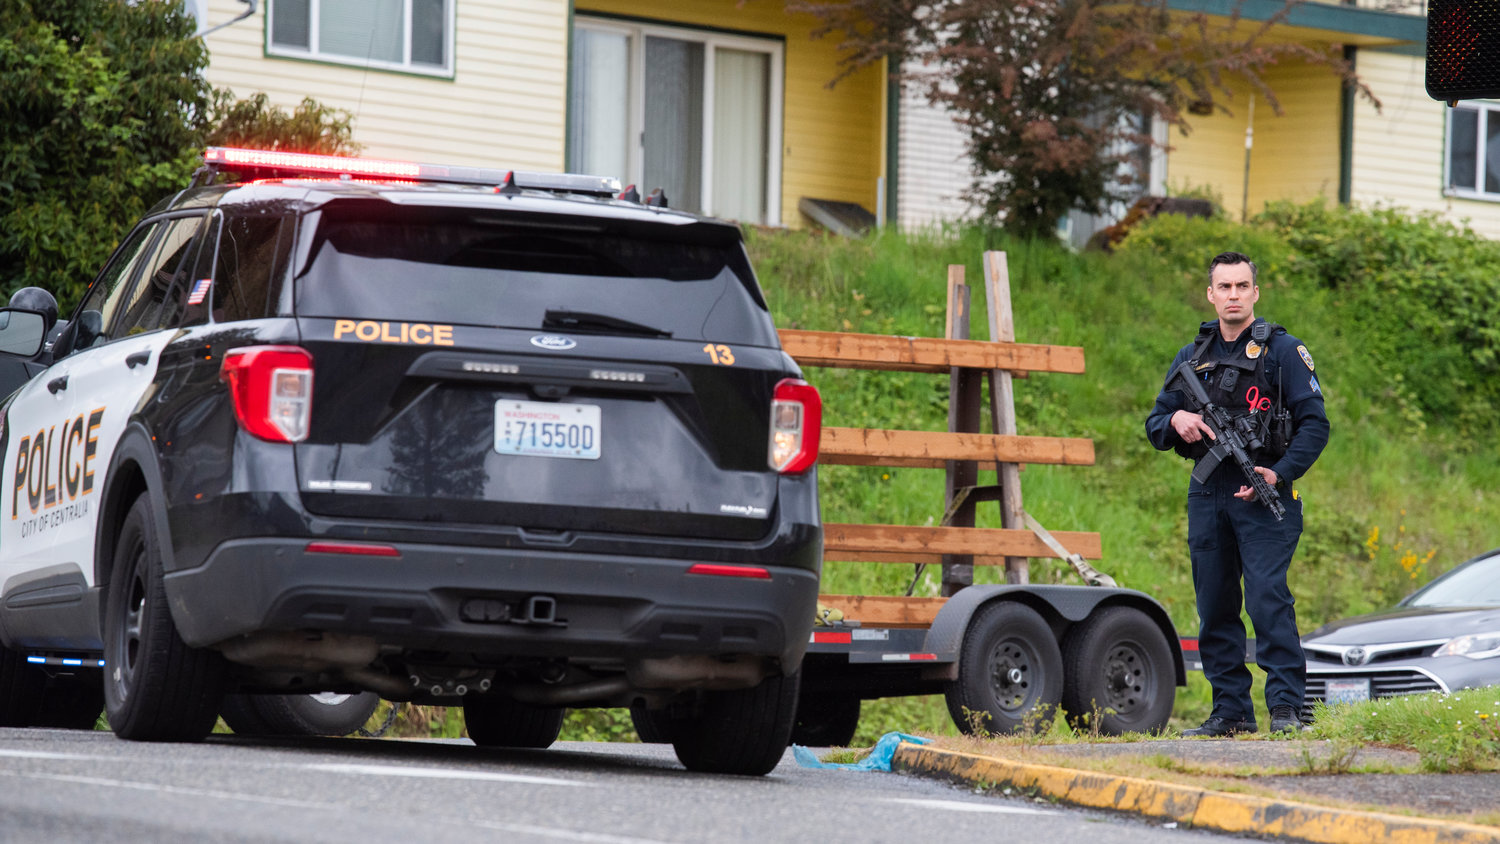 Detective Sergeant David Clary with the Centralia Police Department stands with a weapon indexed near Southwest 13th Street in Chehalis as officers search for a suspect following a robbery in the 600 block of South Market Boulevard.